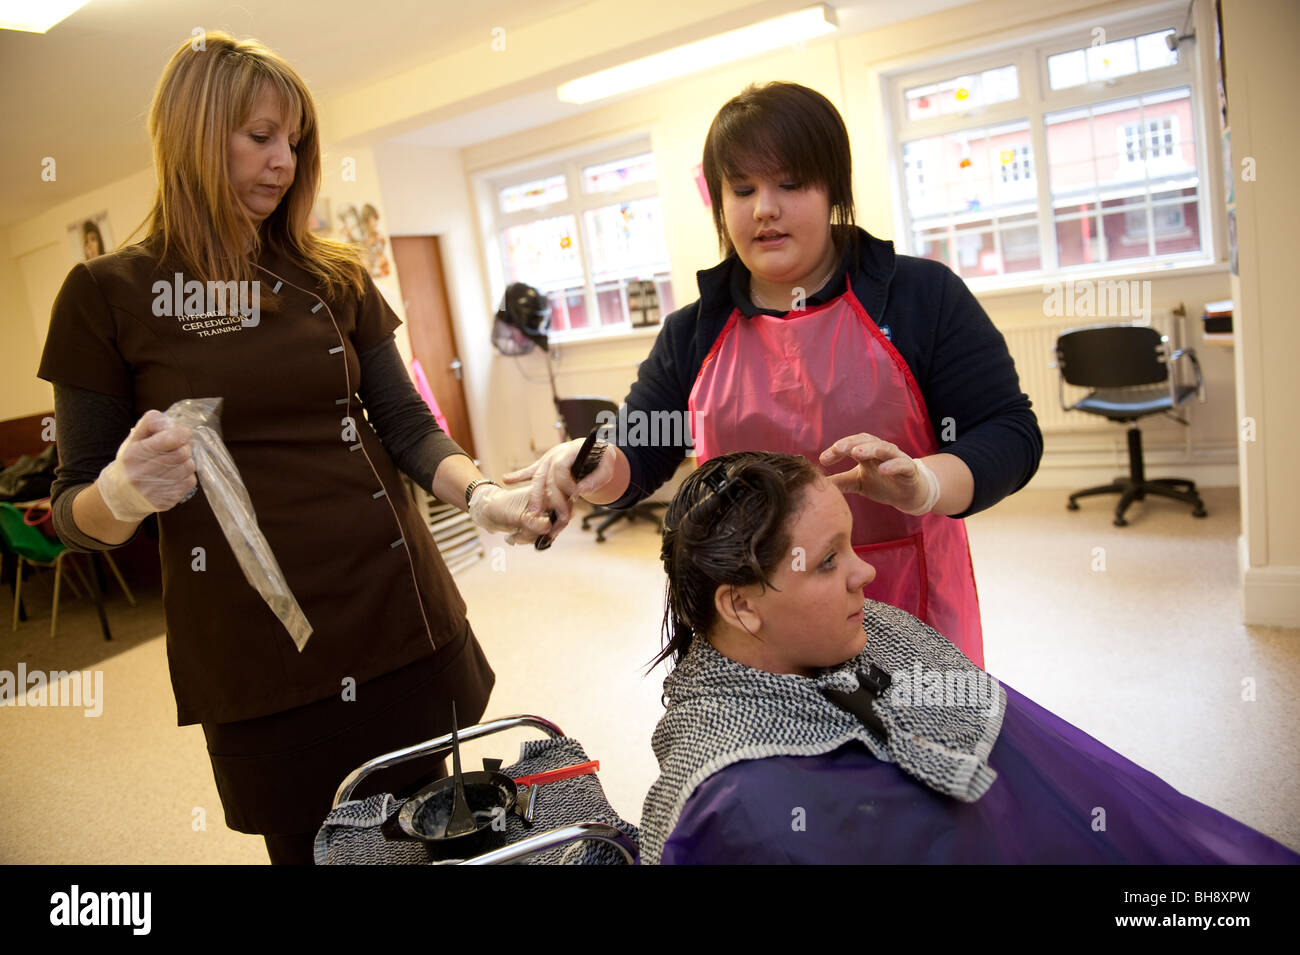 A woman vocational tutor teaching hairdressing skills to two teenage girls in secondary school, UK Stock Photo